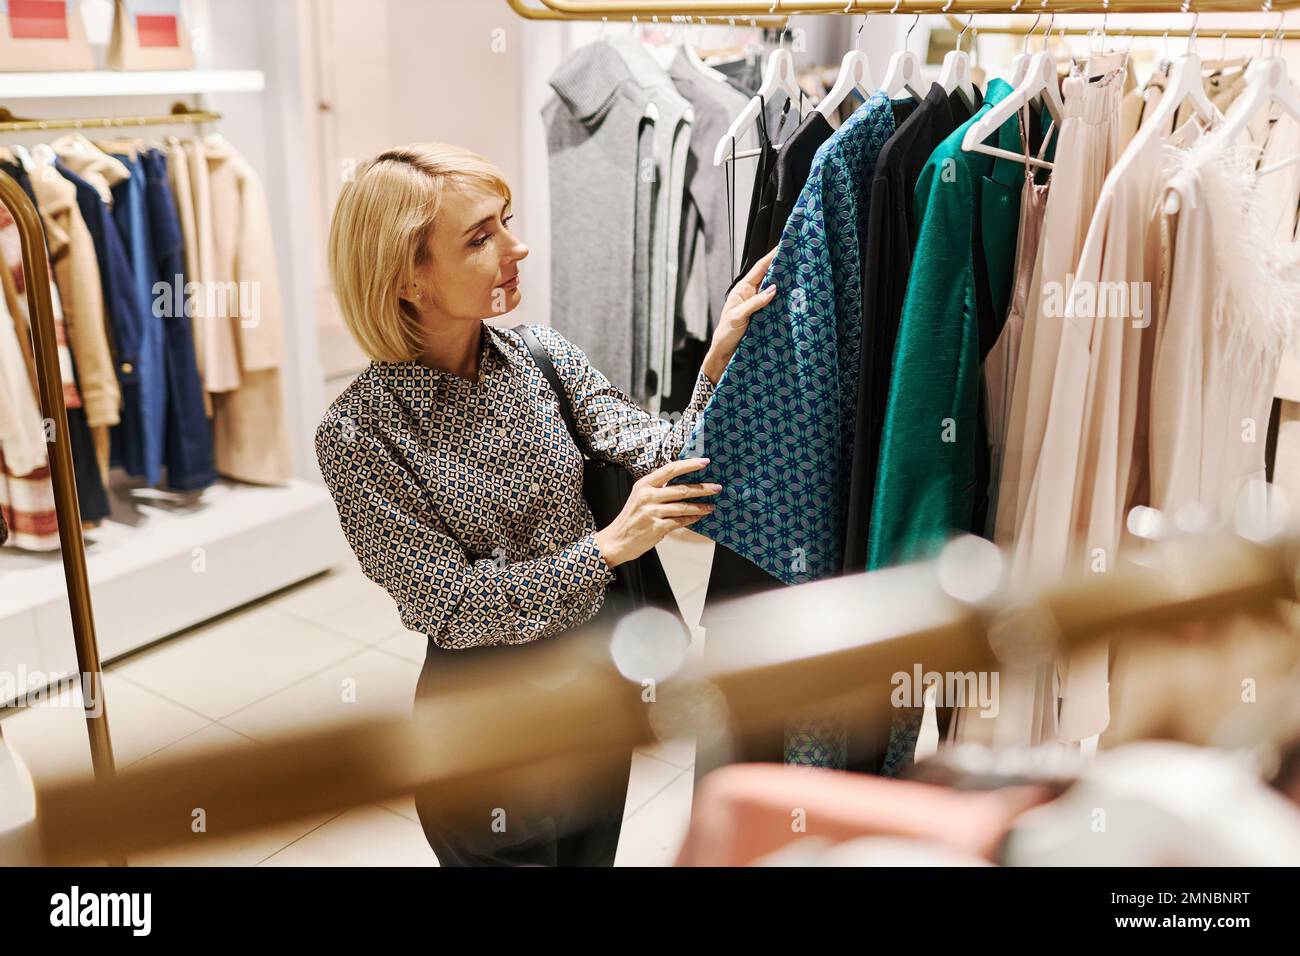 Side view portrait of elegant young woman choosing clothes in luxury boutique, copy space Stock Photo